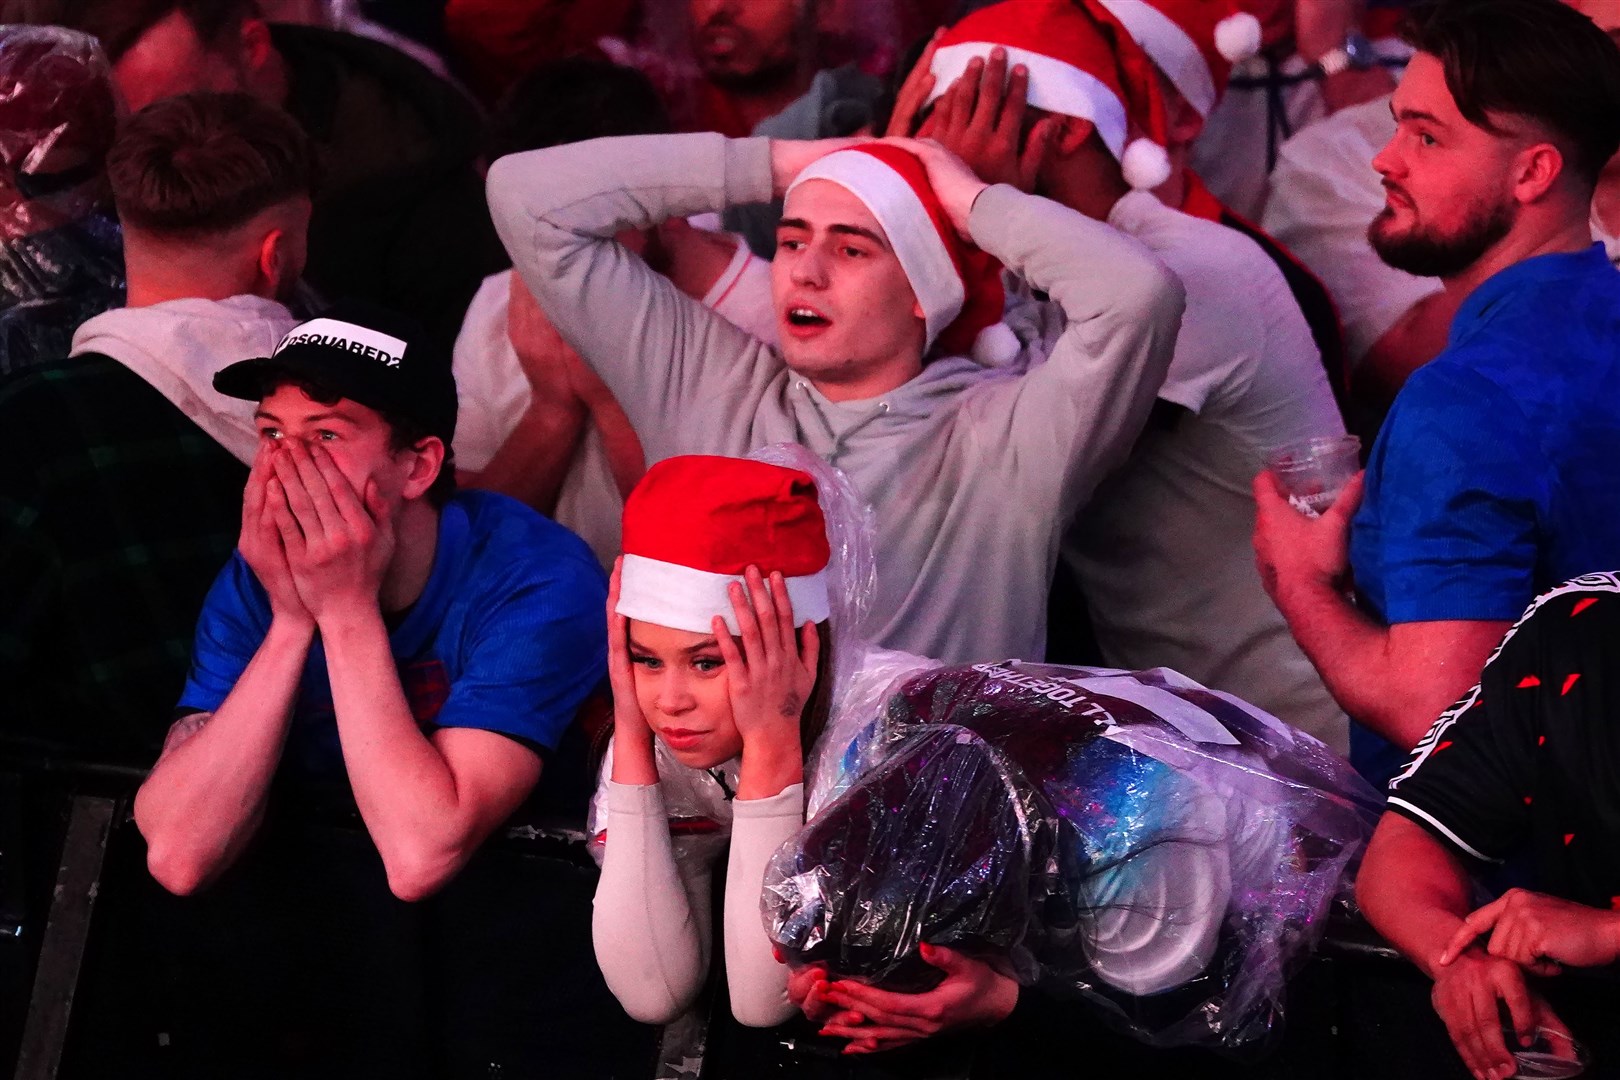 England fans react to the goal at Boxpark Croydon in London (Victoria Jones/PA)